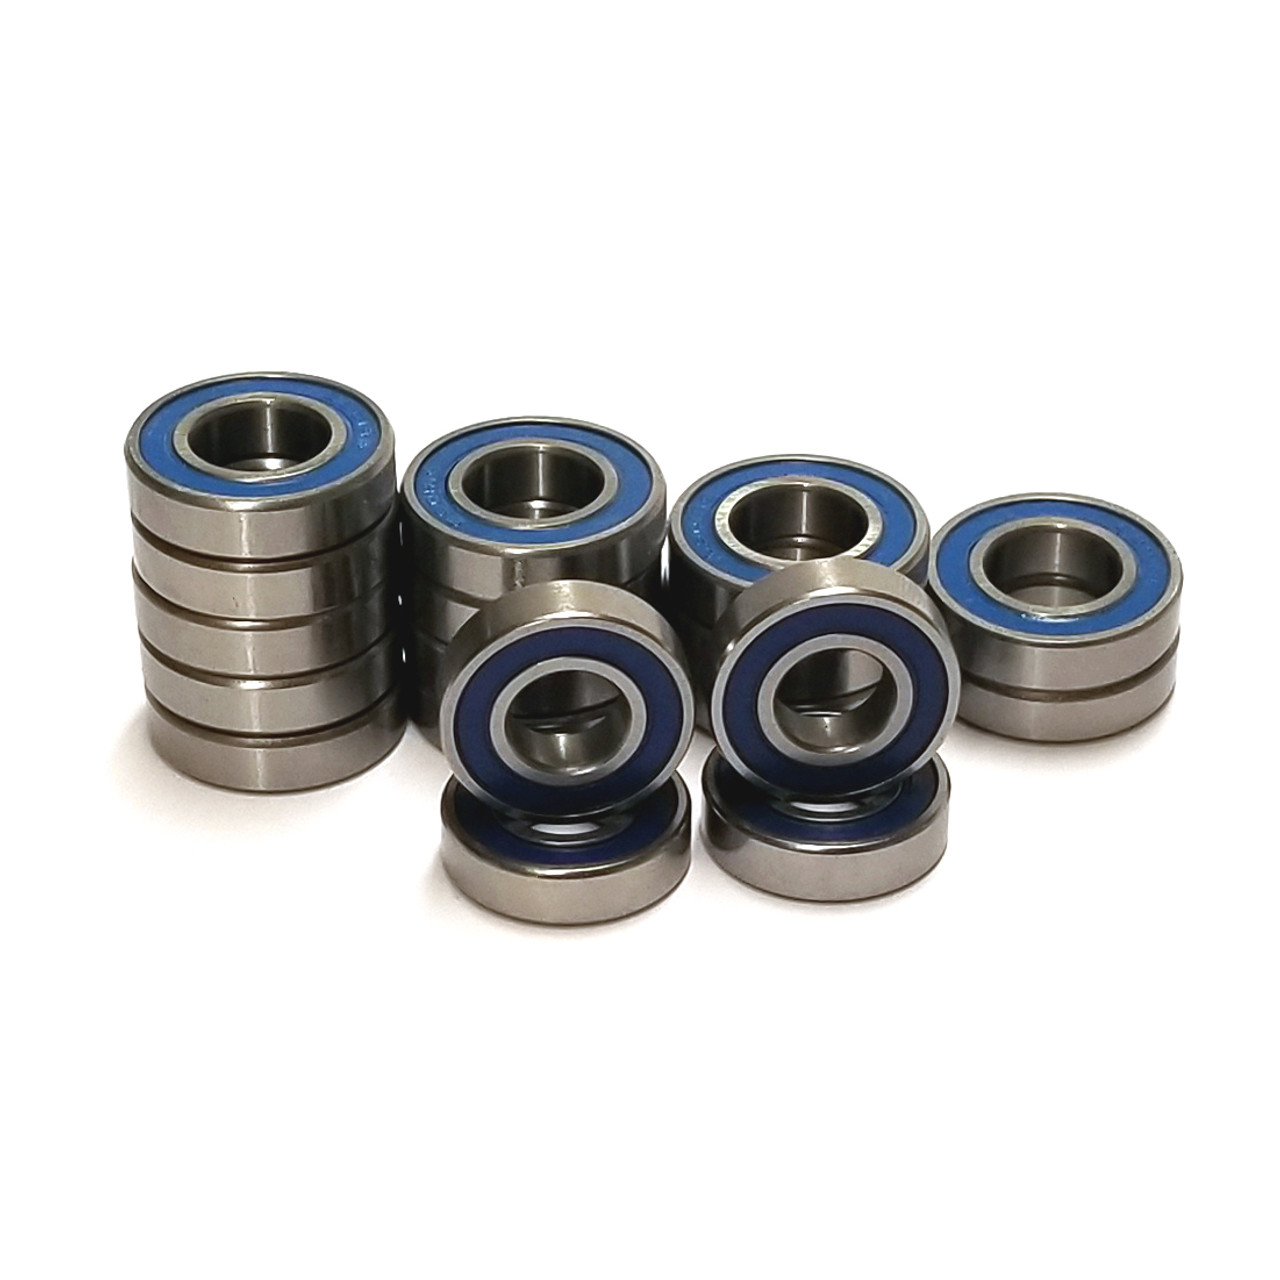 Team Losi DBXL-E 1/5th Scale Electric truck complete 18 Piece blue rubber sealed bearing kit!  Swap out all your worn out bearings with our high quality replacements.